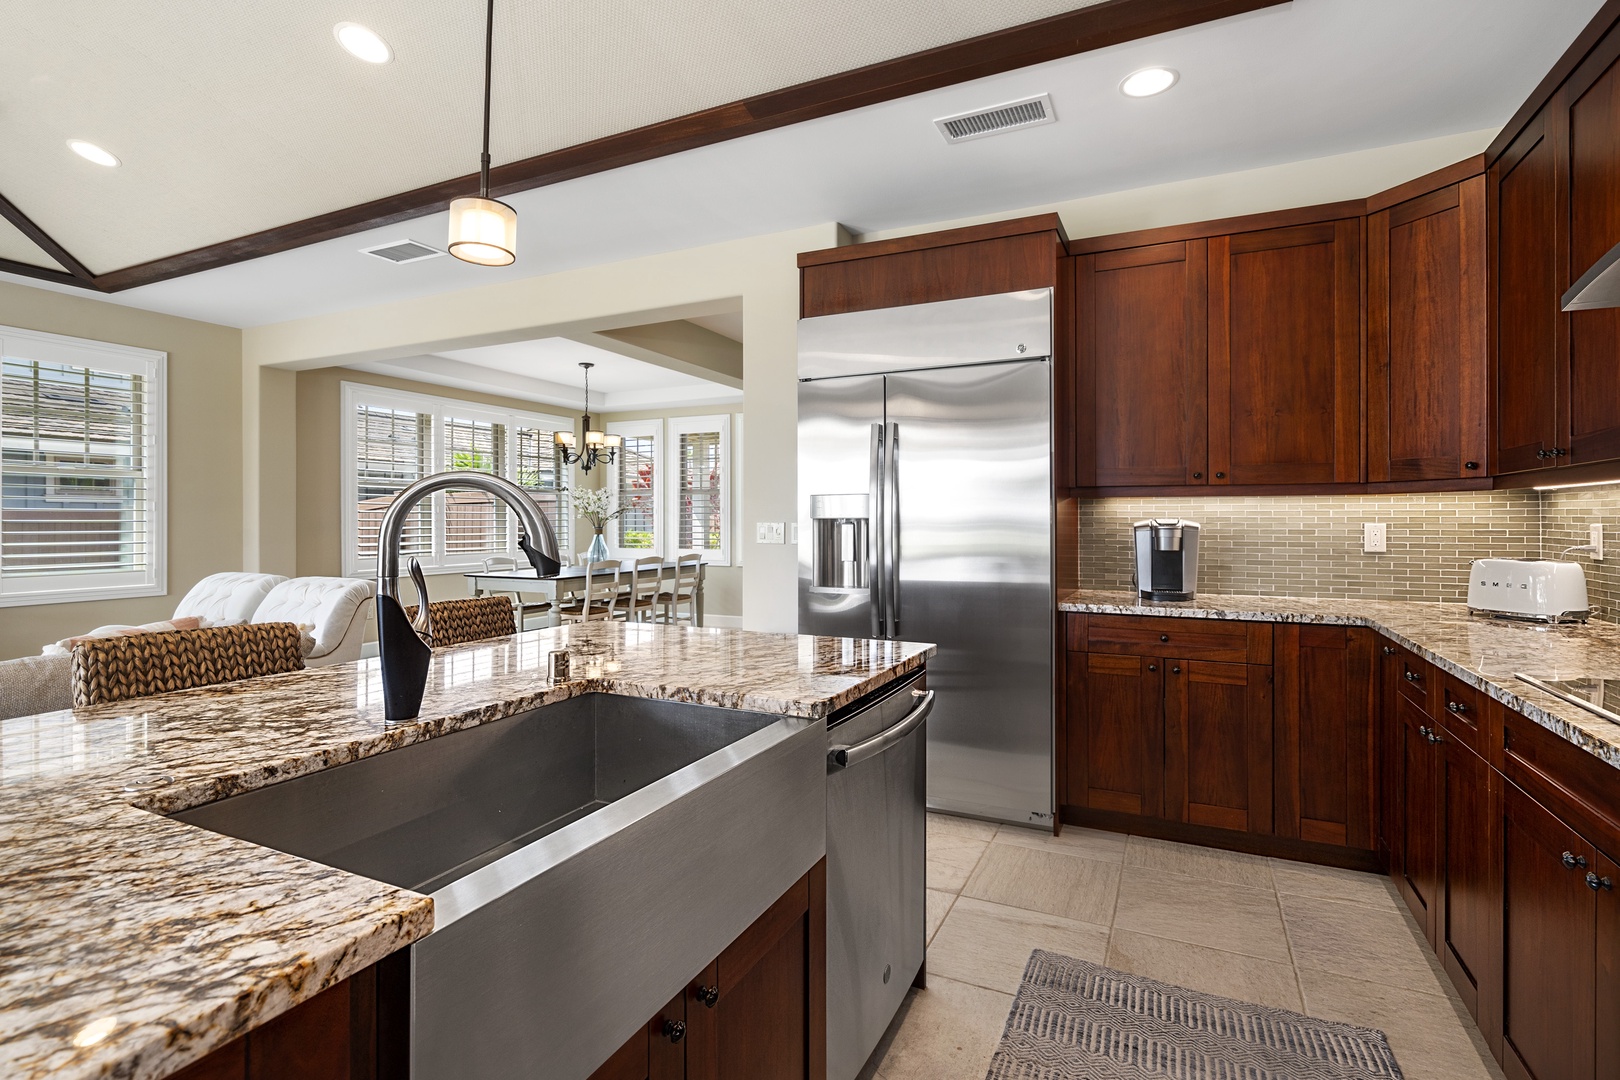 Kailua-Kona Vacation Rentals, Holua Kai #8 - glorious chef kitchen is fully-equipped for your dining needs with a lineup of brand new, stainless steel appliances and stunning granite slab countertops.